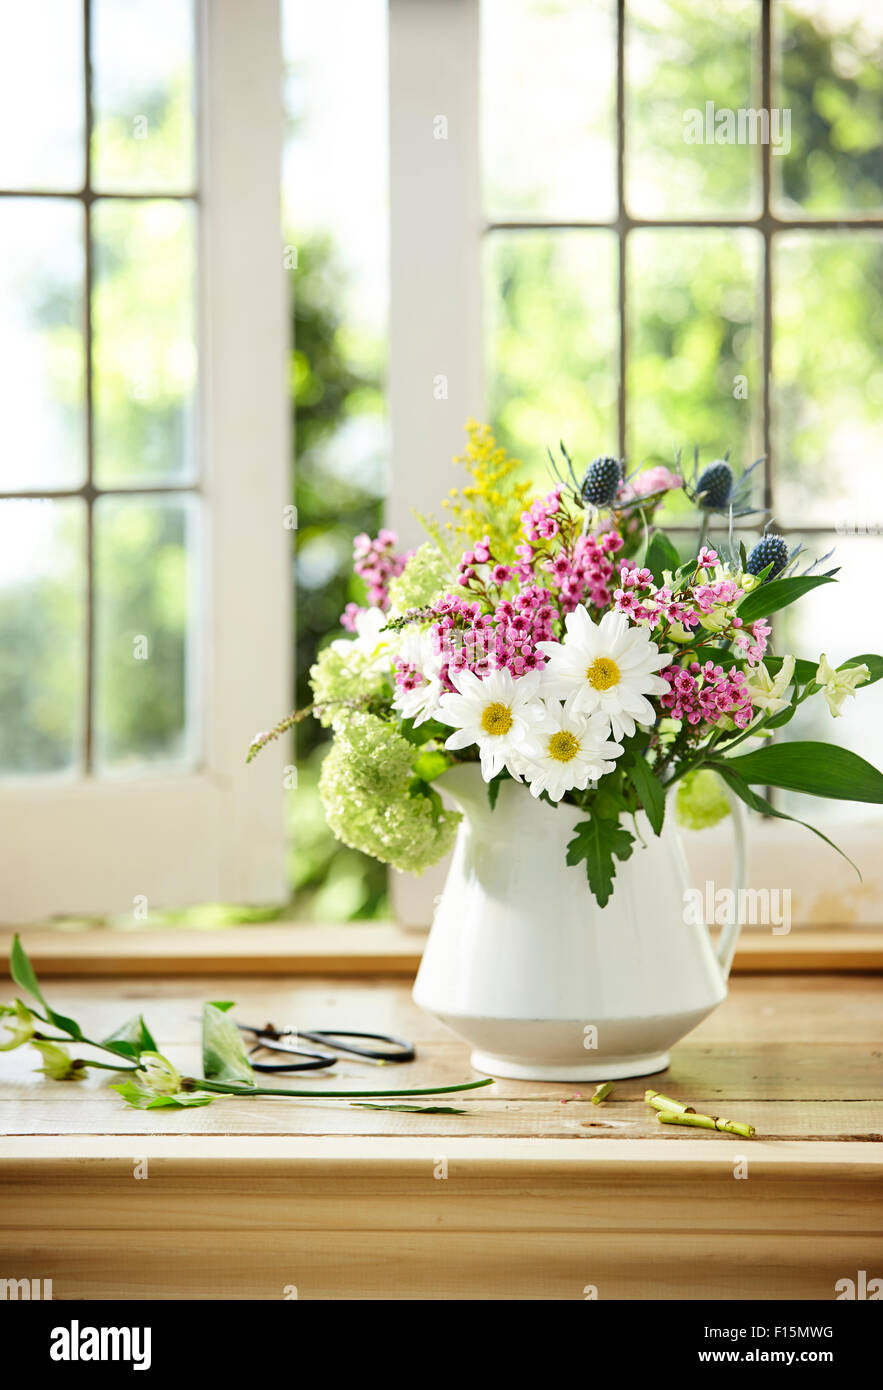 Bouquet of Fresh Cut Flowers containing Daisy, Flox, Sea Holly, Hydrangea, and Ragweed in White Pitcher Vase on Window Sill Stock Photo